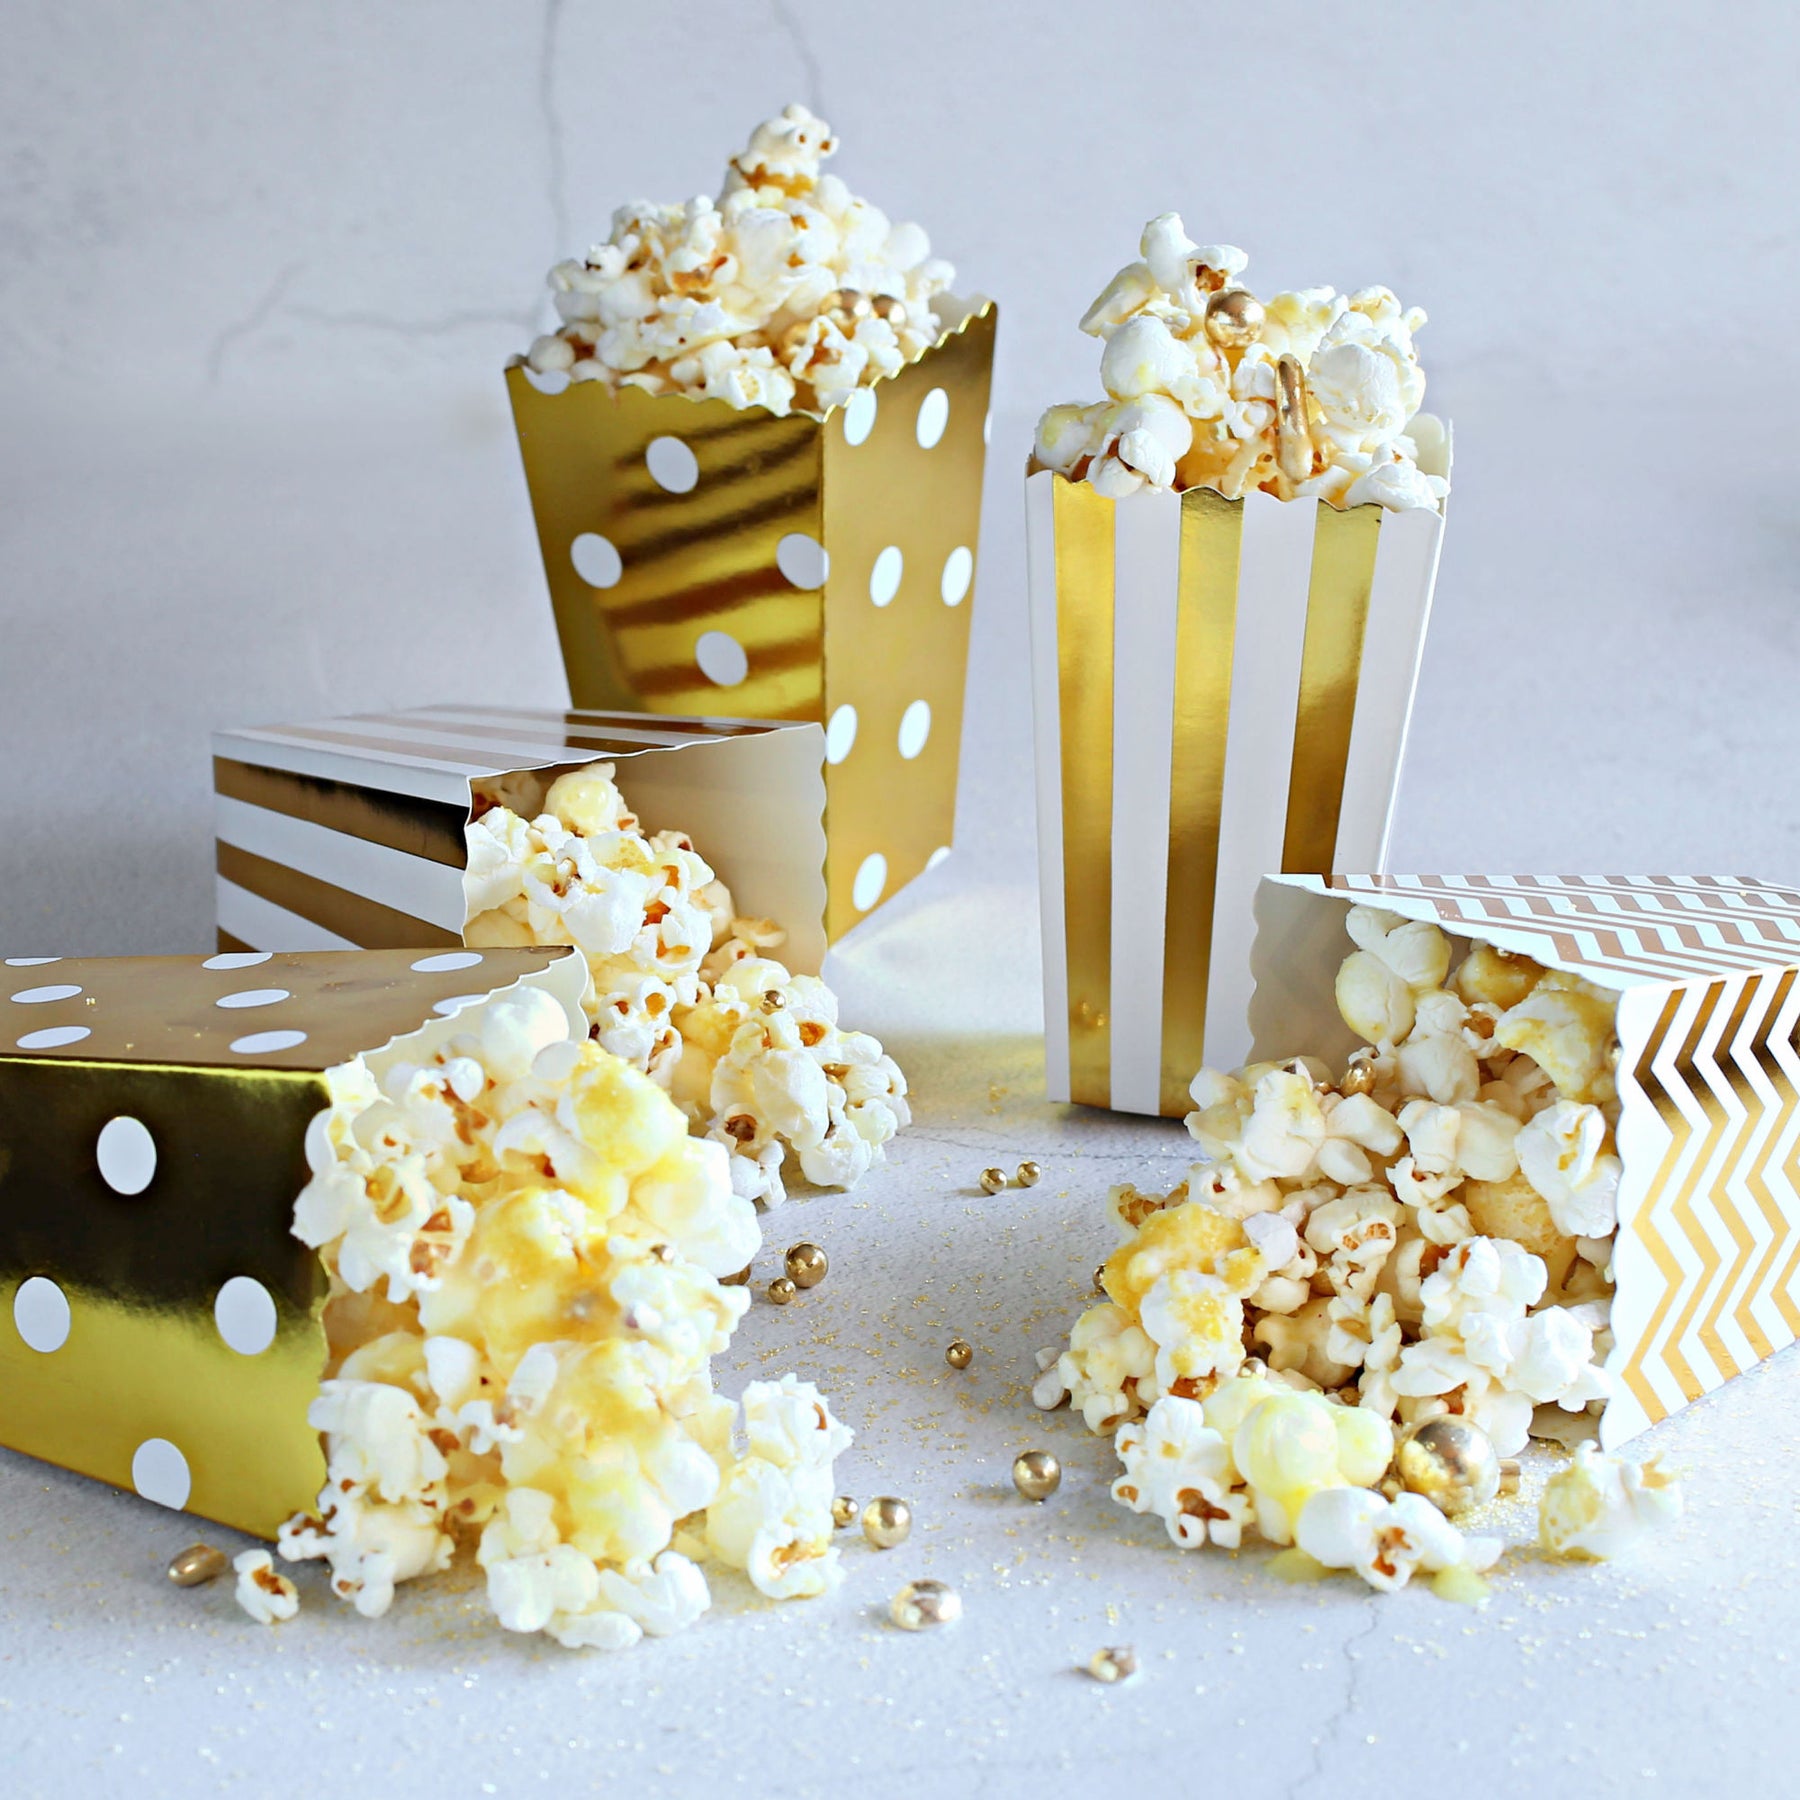 How to make Gold Popcorn